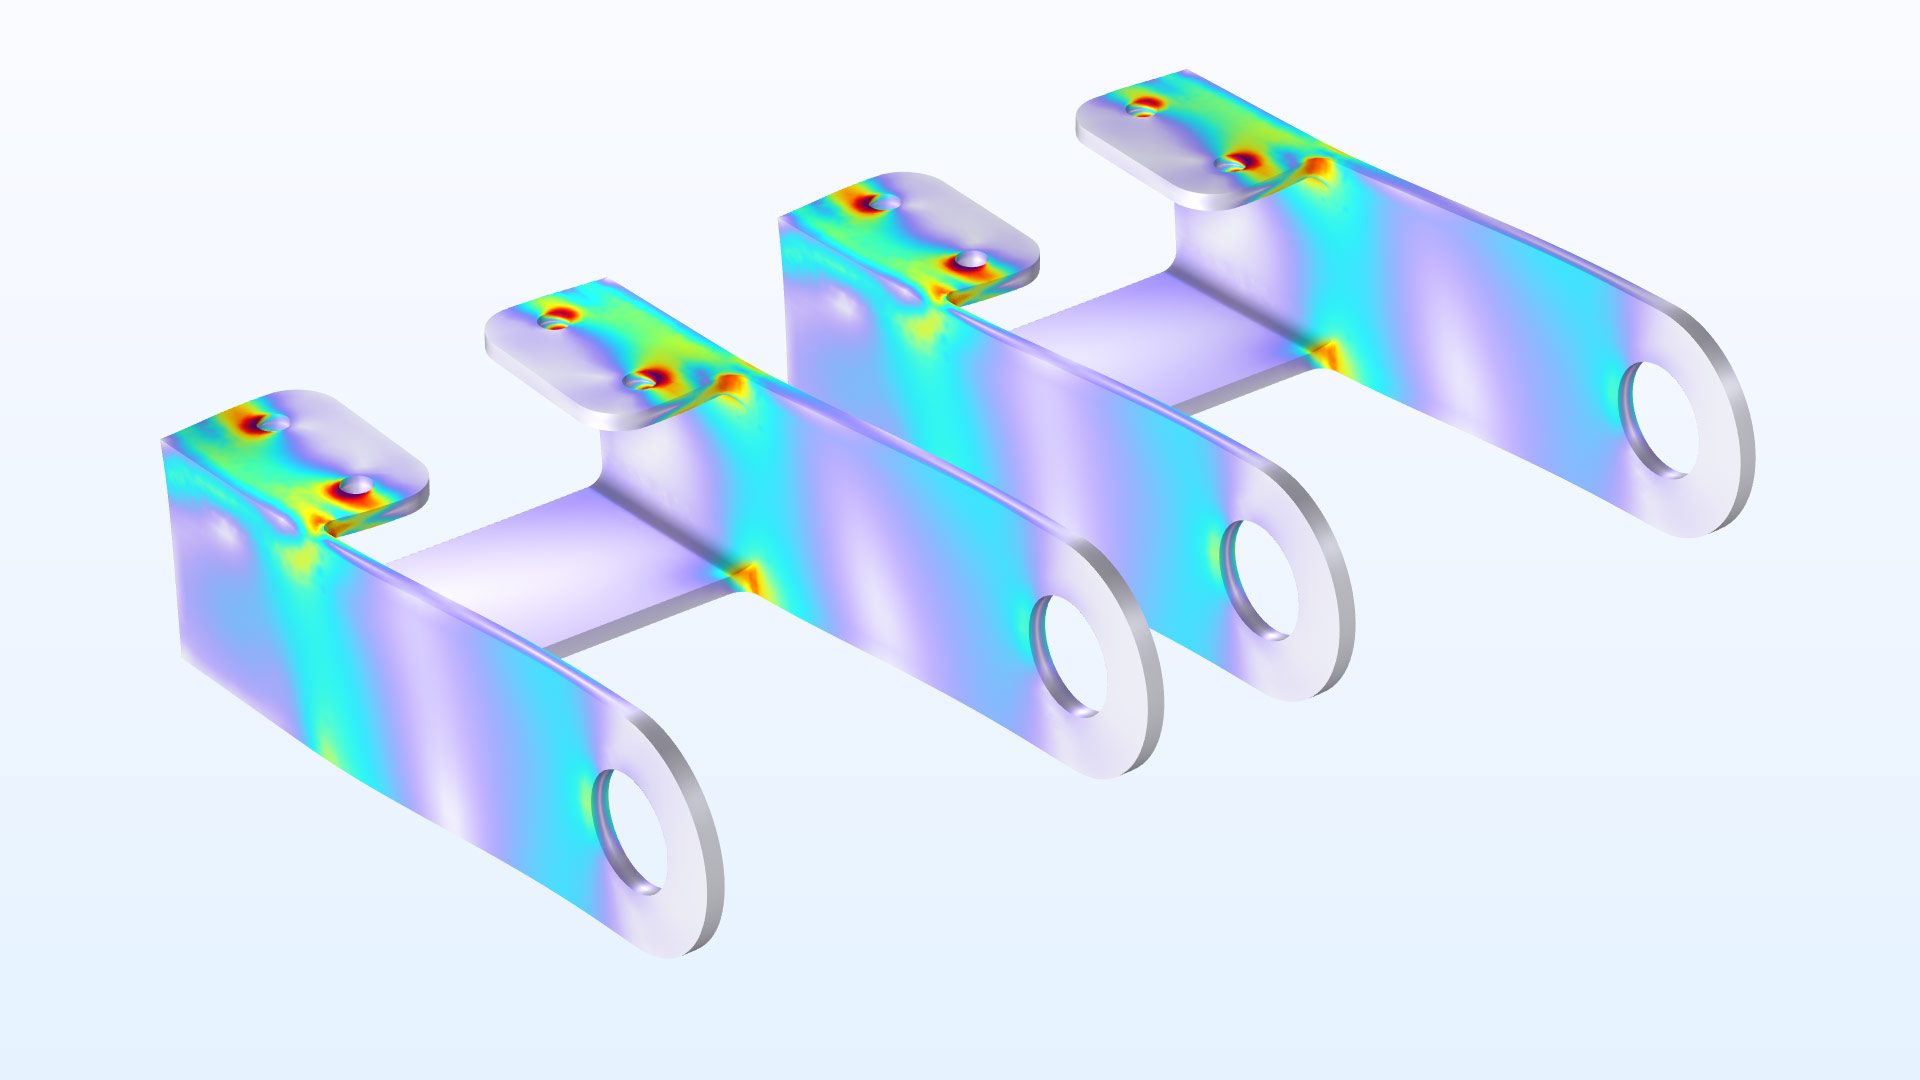 Two bracket models showing stress in the Prism color table.